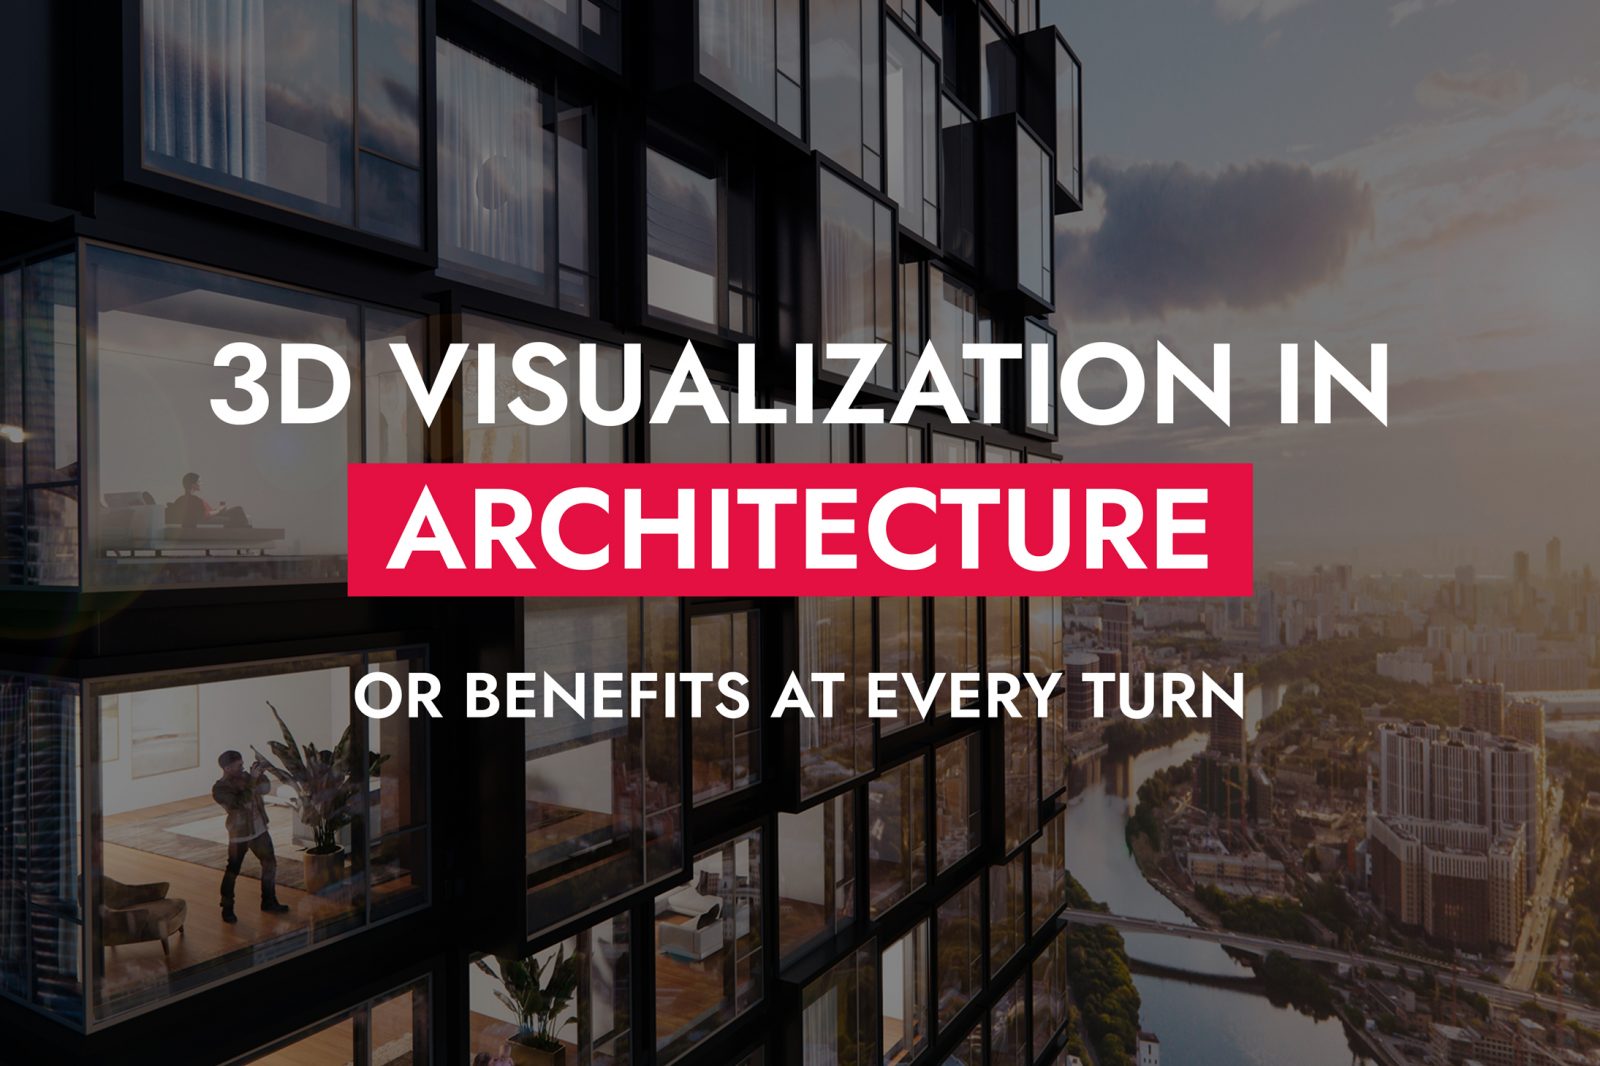 3D Visualization In Architecture Or Benefits At Every Turn